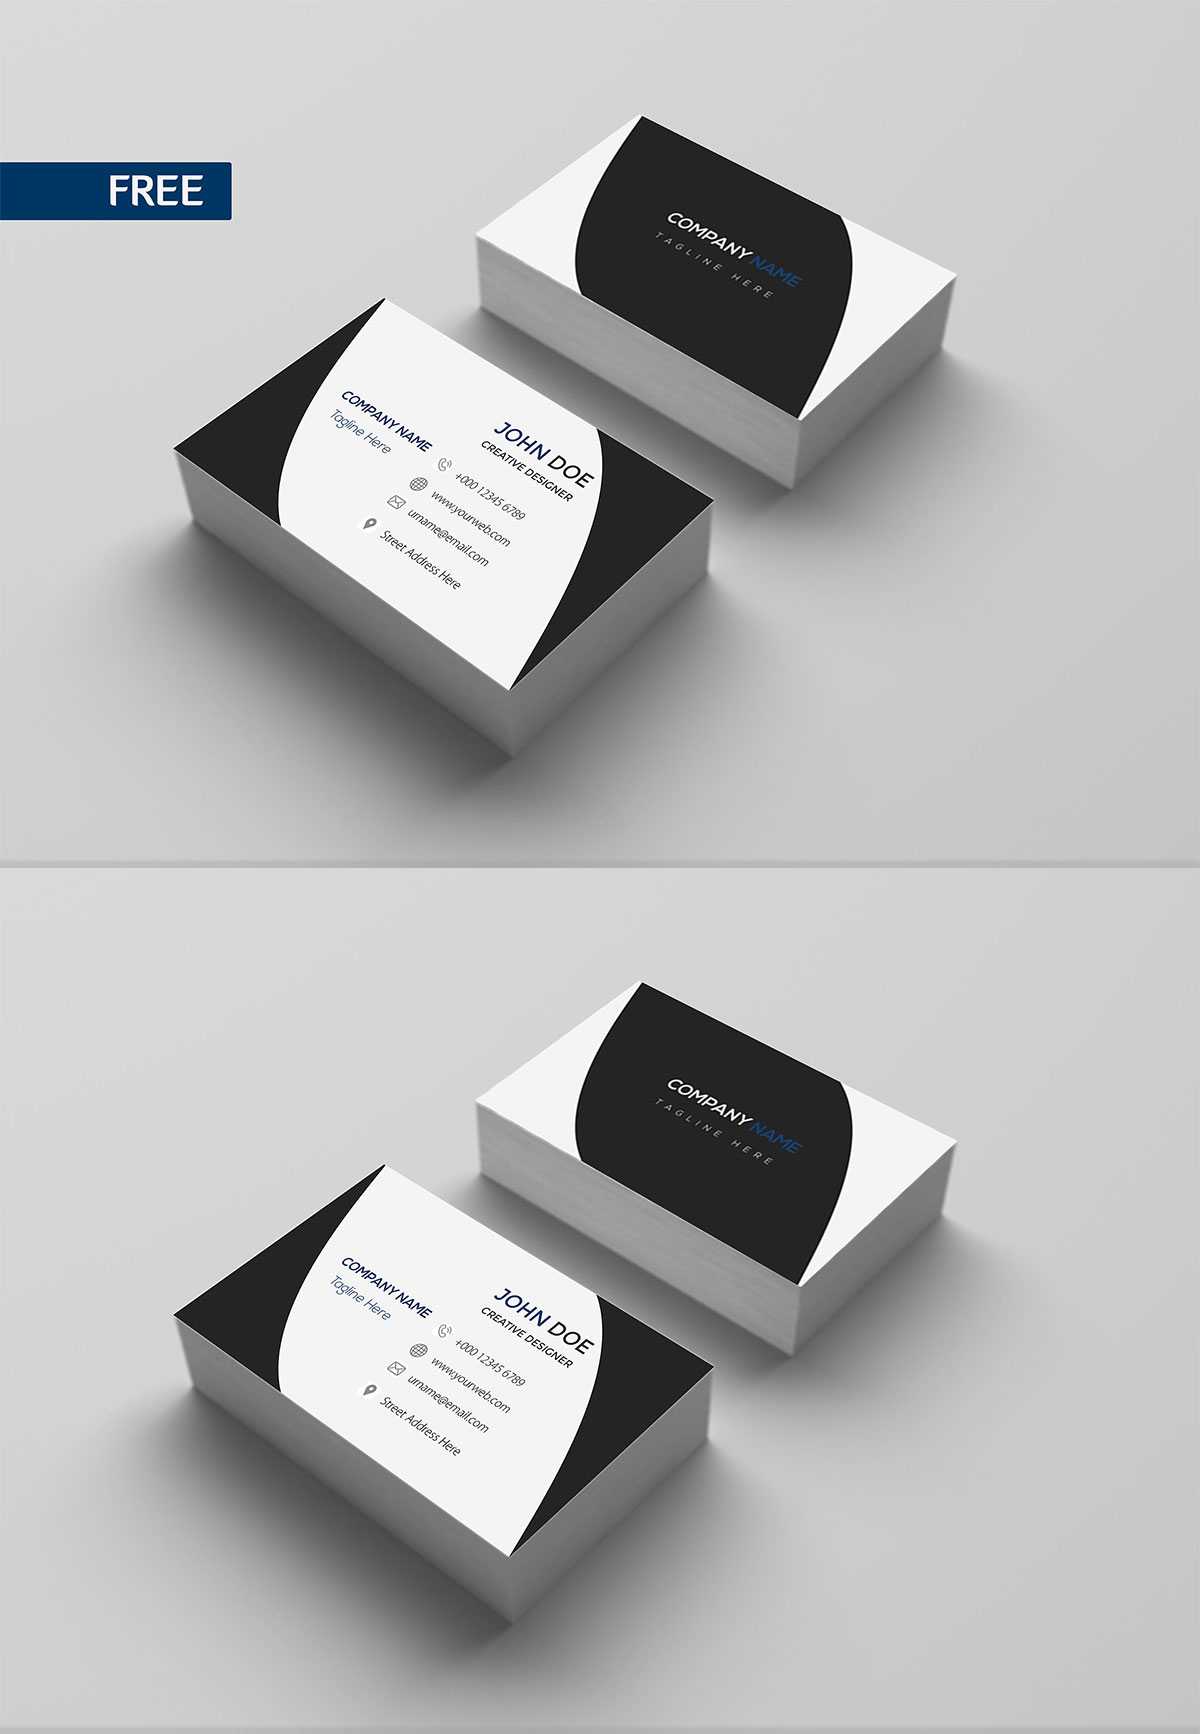 Free Print Design Business Card Template – Creativetacos Pertaining To Free Template Business Cards To Print